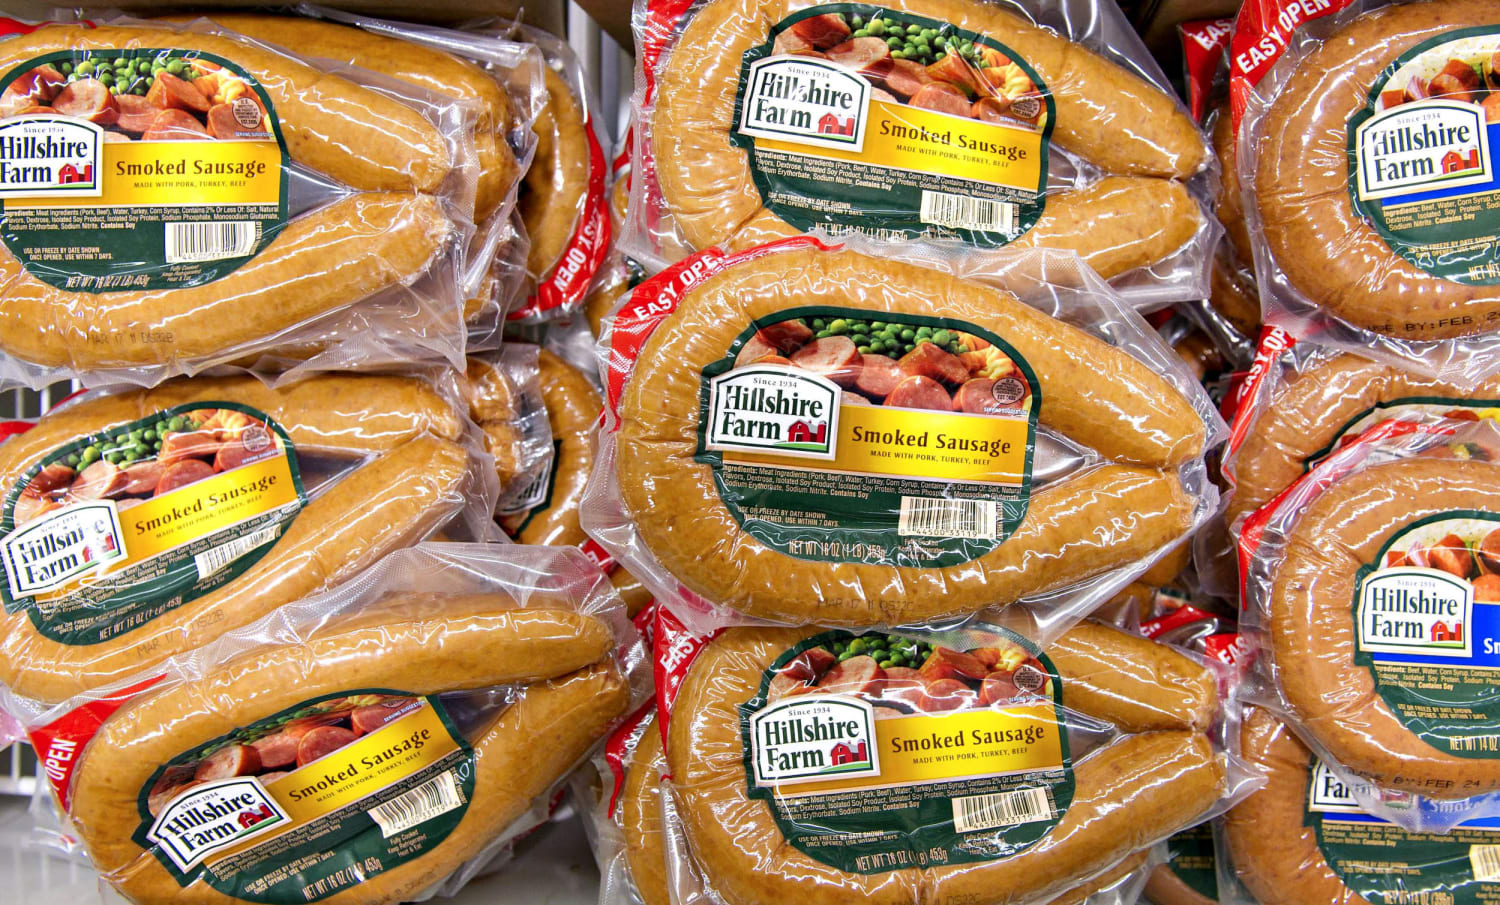 Over 15,000 pounds of sausage recalled for possibly containing bone fragments